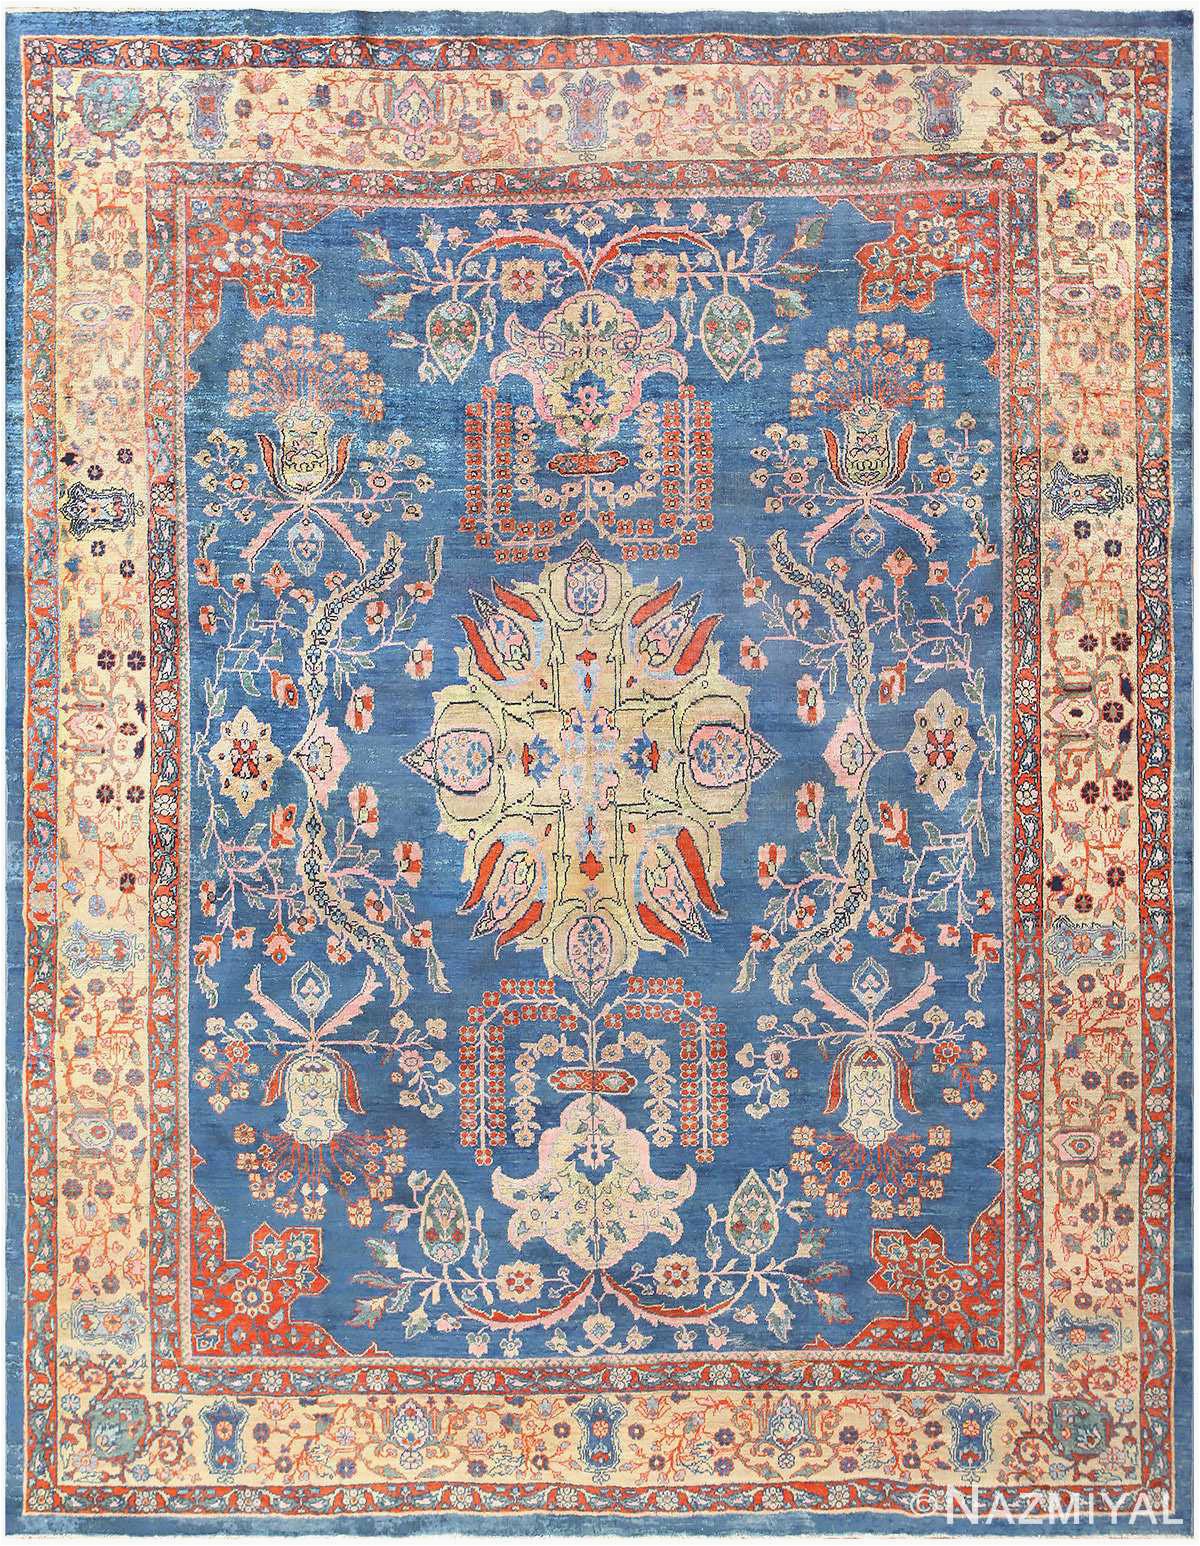 Orange and Blue Persian Rug Blue Antique Persian Sultanabad Rug